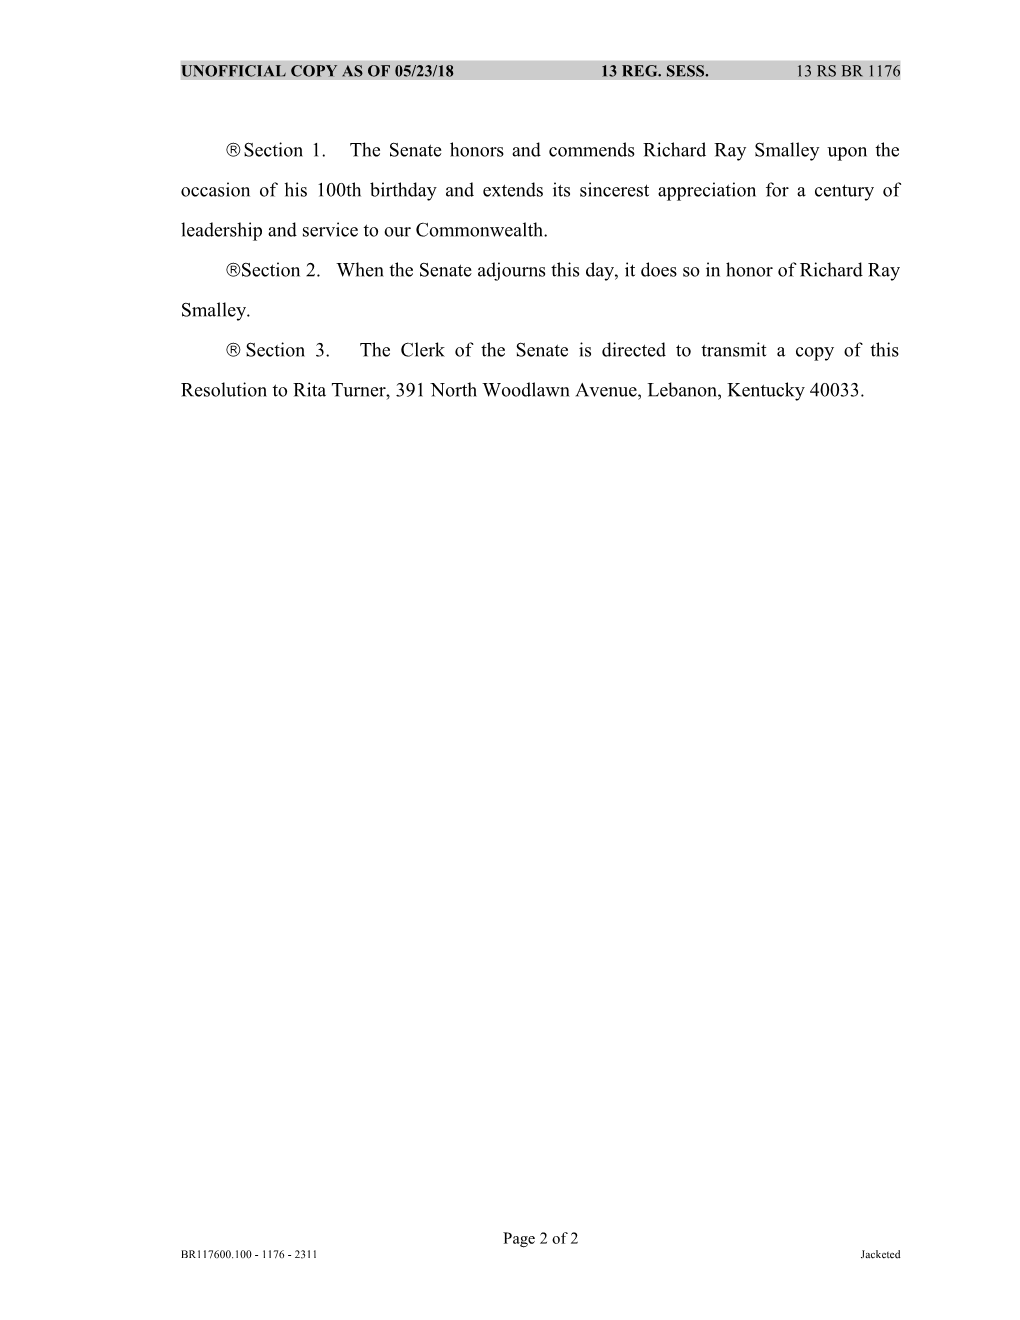 A RESOLUTION Adjourning the Senate in Honor of Richard Ray Smalley Upon the Occasion Of